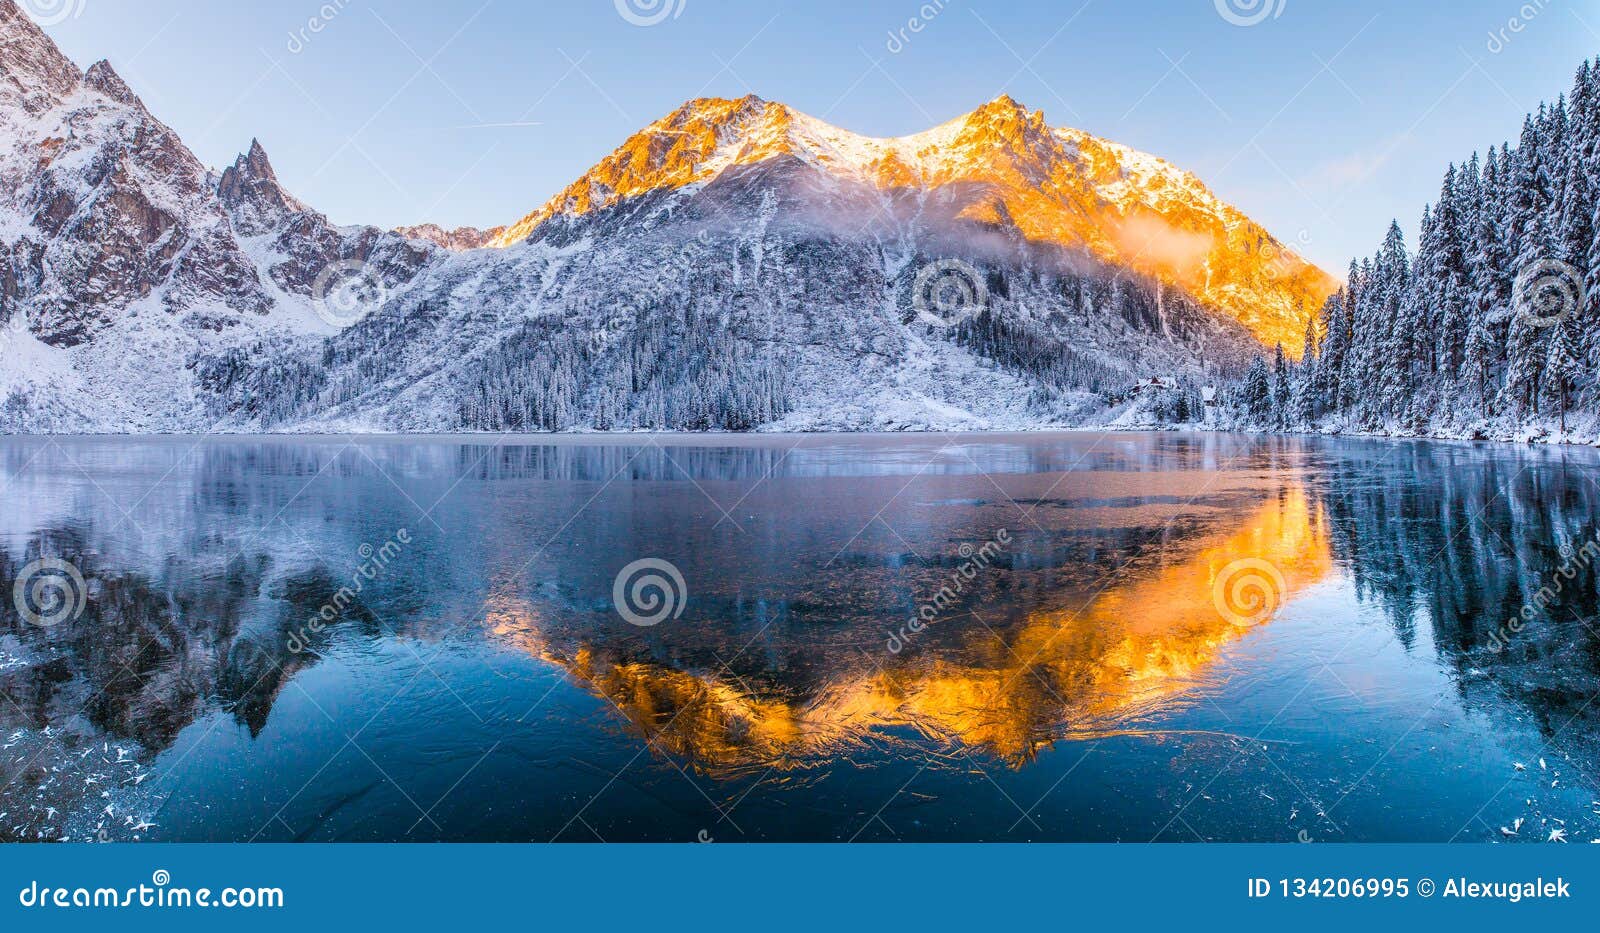 Winter Background. Winter Landscape with Mountains Reflected in Clear Frozen  Lake Stock Image - Image of beauty, blue: 134206995